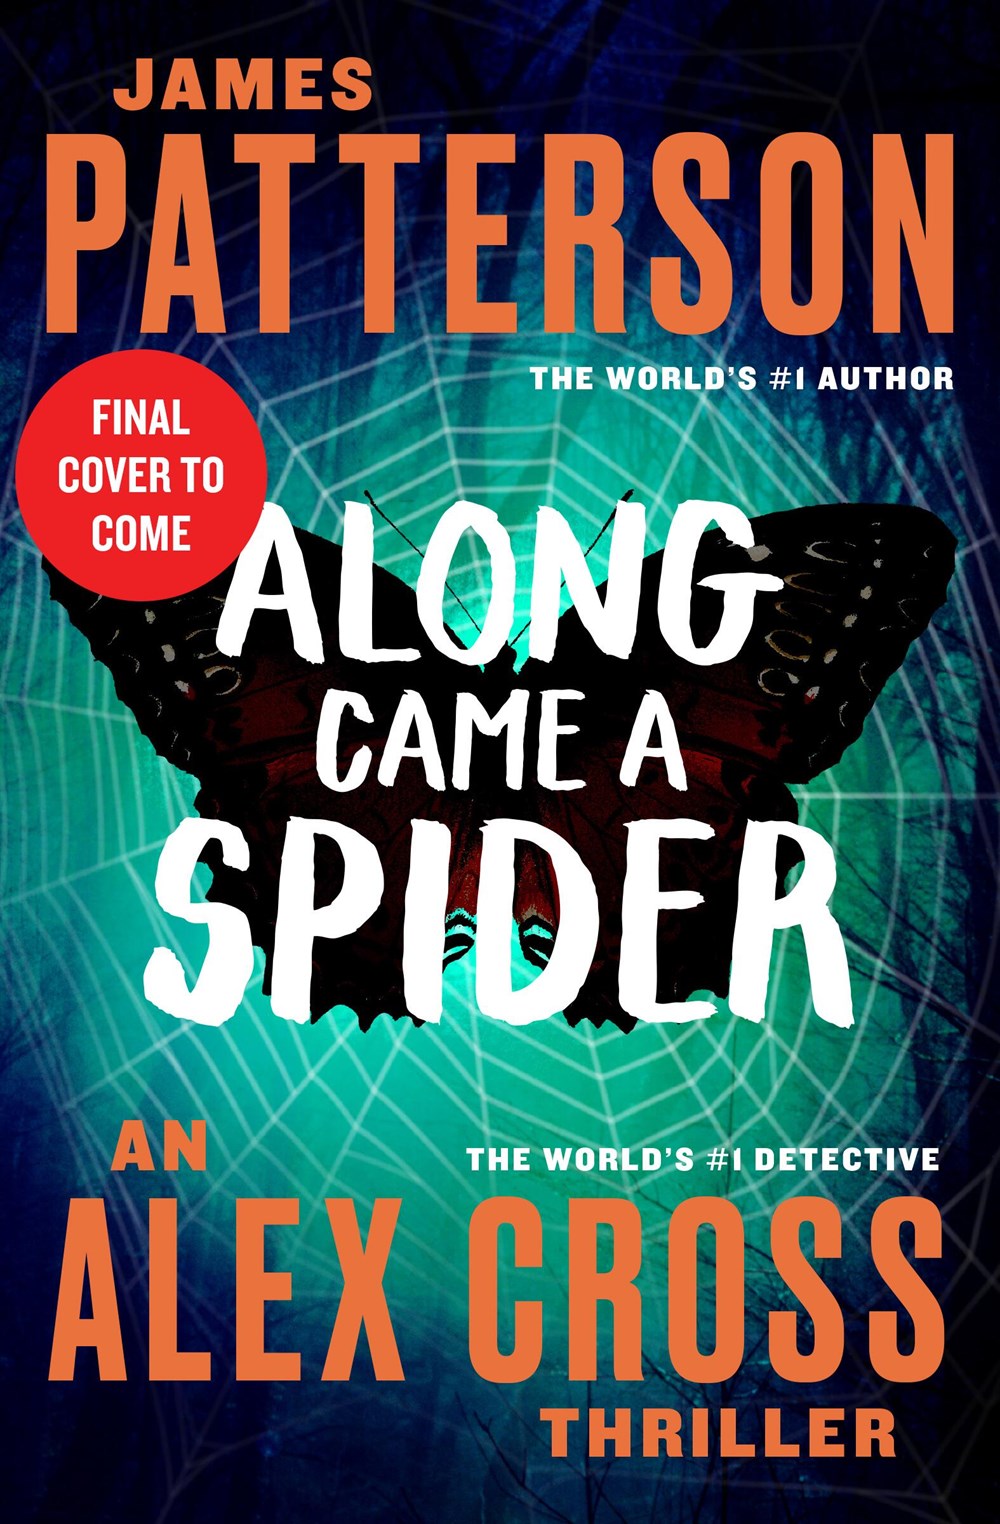 Along Came A Spider: An Alex Cross Thriller by James Patterson